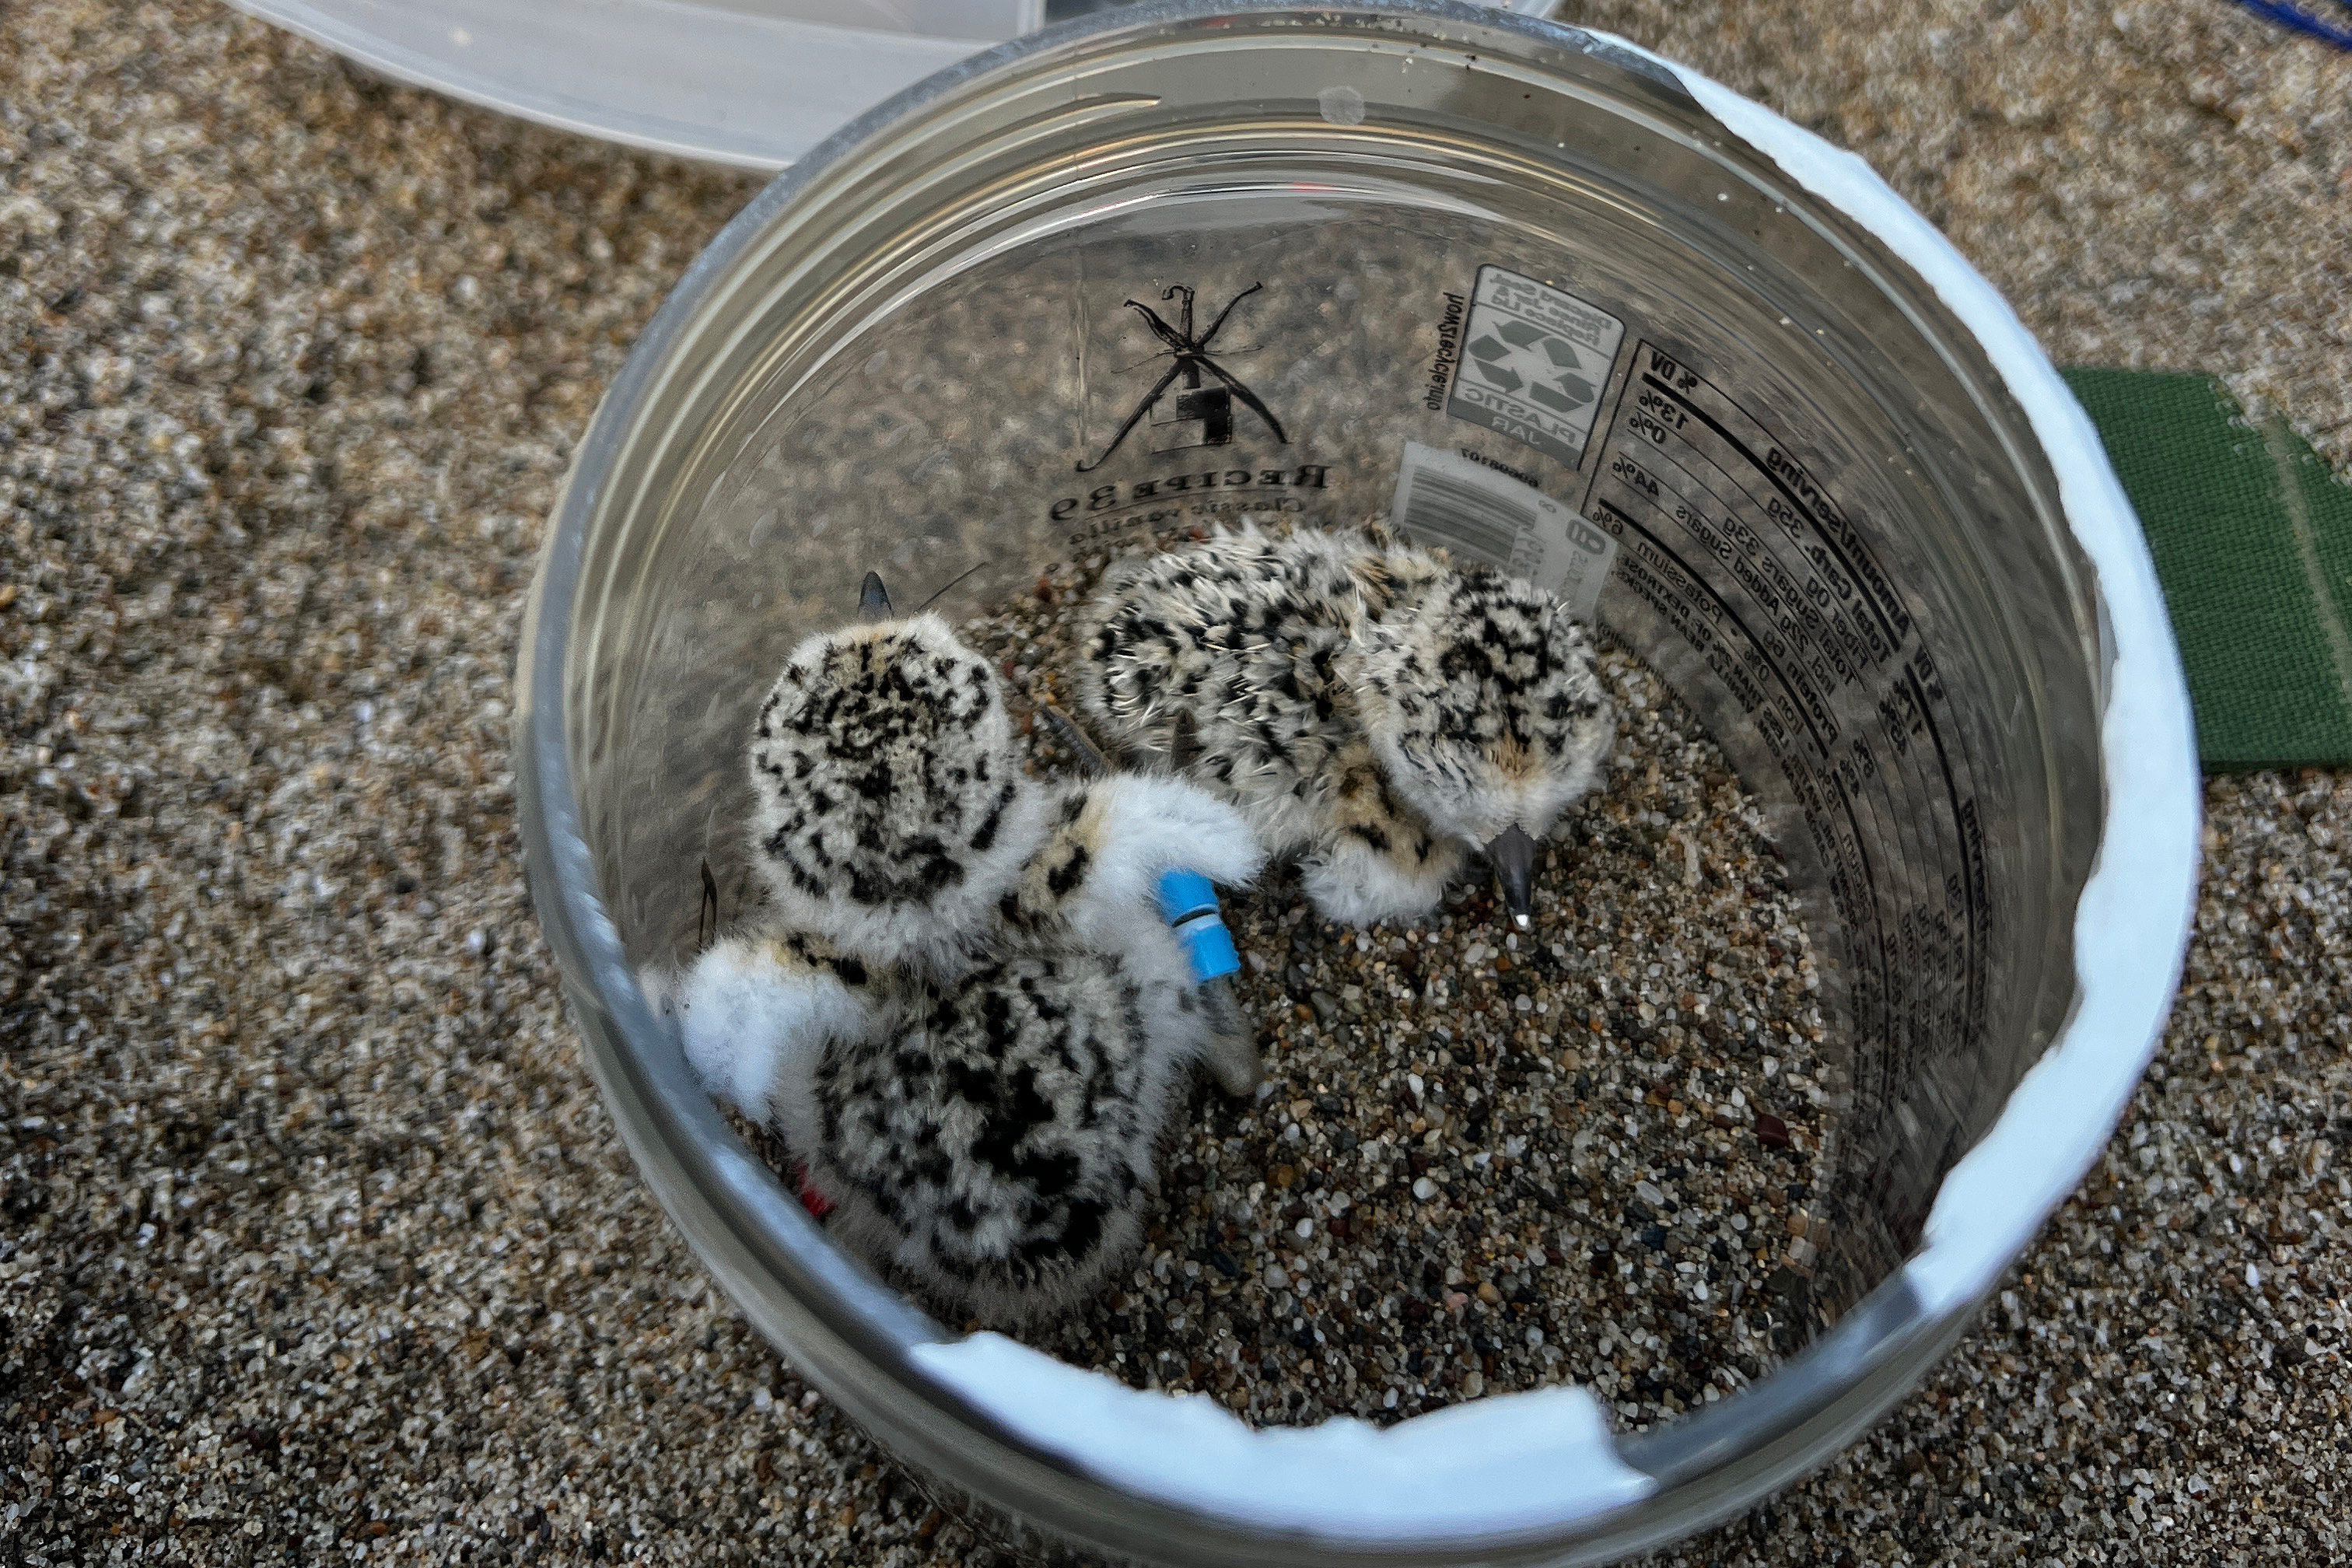 A photo of two small black-speckled, beige-colored chicks in a plastic container on a sandy beach.